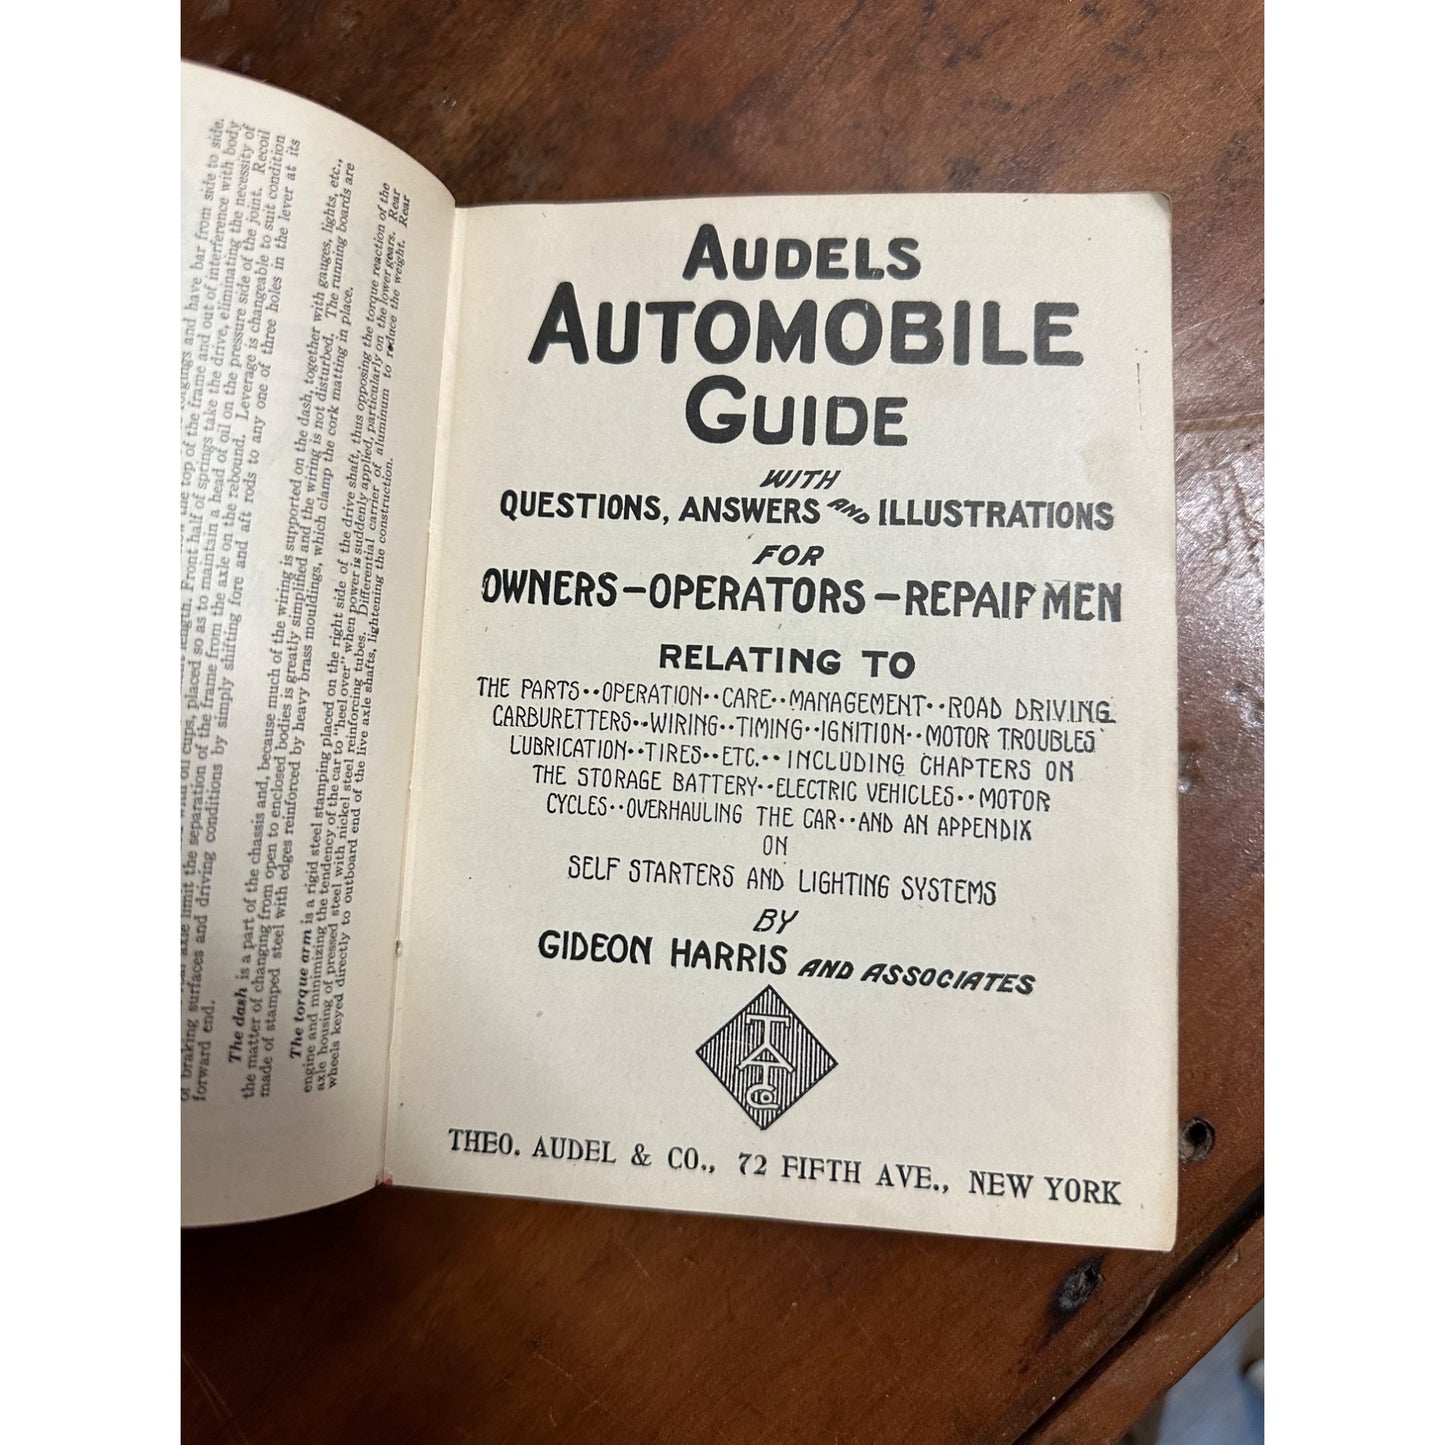 VTG 1915/1920 AUDELS AUTOMOBILE GUIDE BOOK WITH QUESTIONS ILLUSTRATIONS